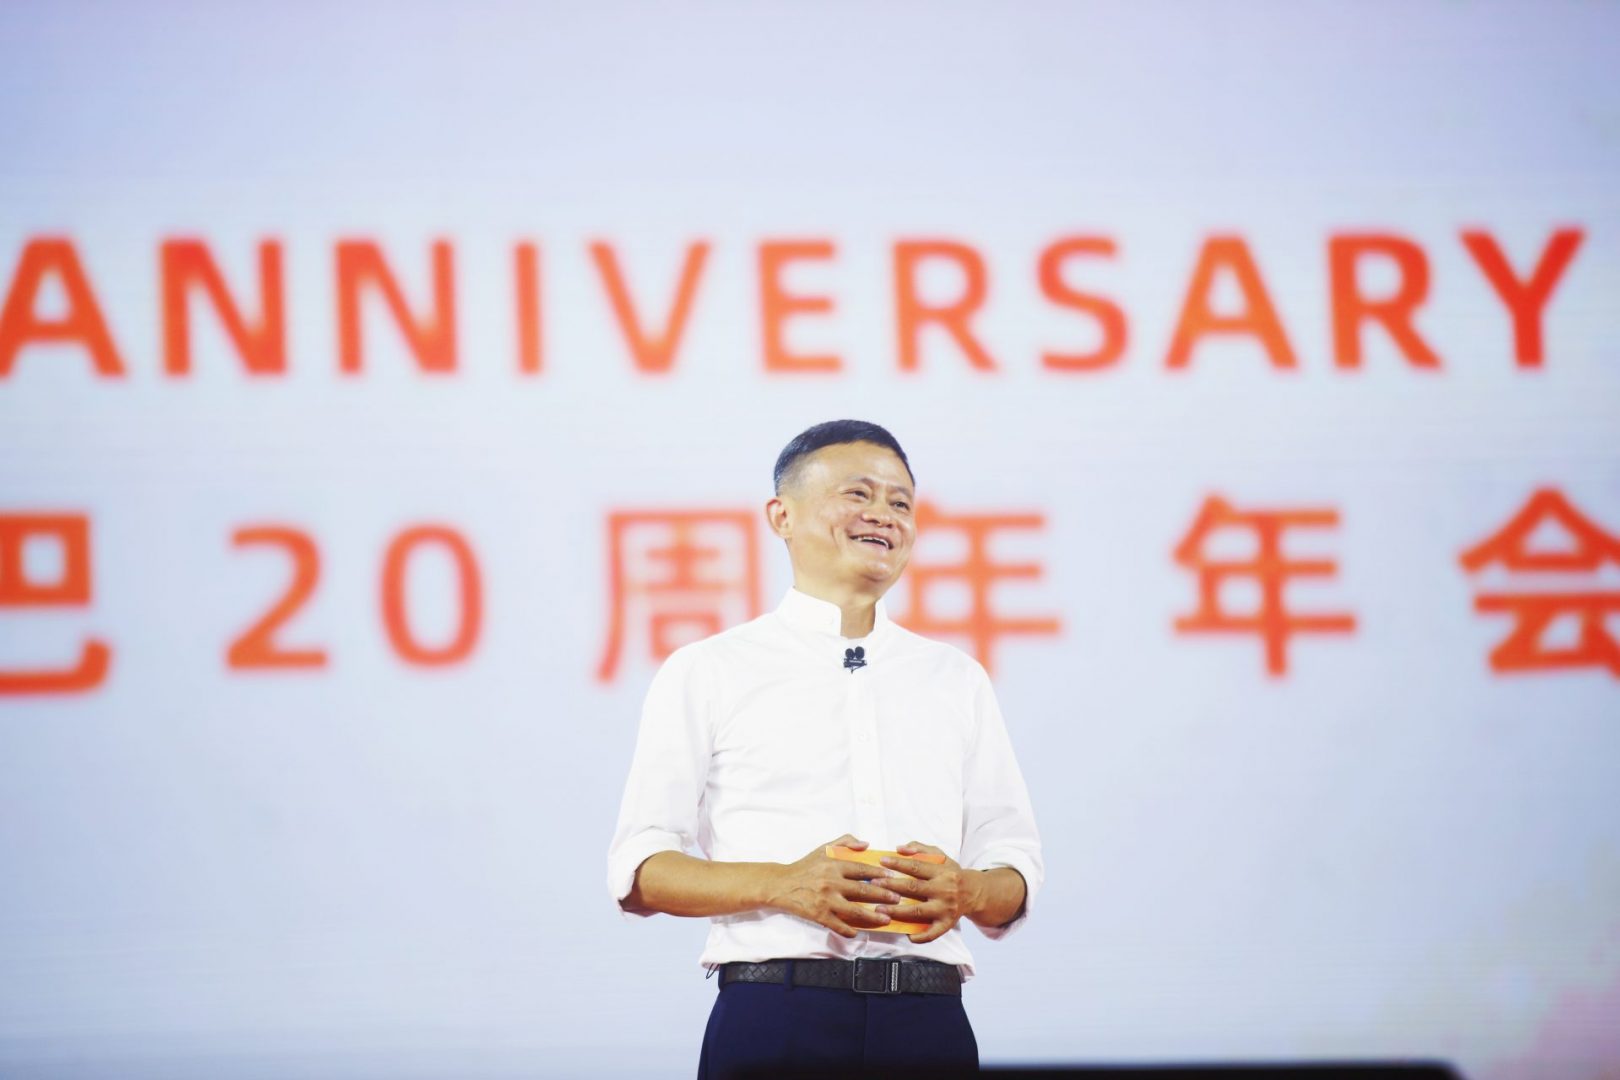 The Best Things Jack Ma Said